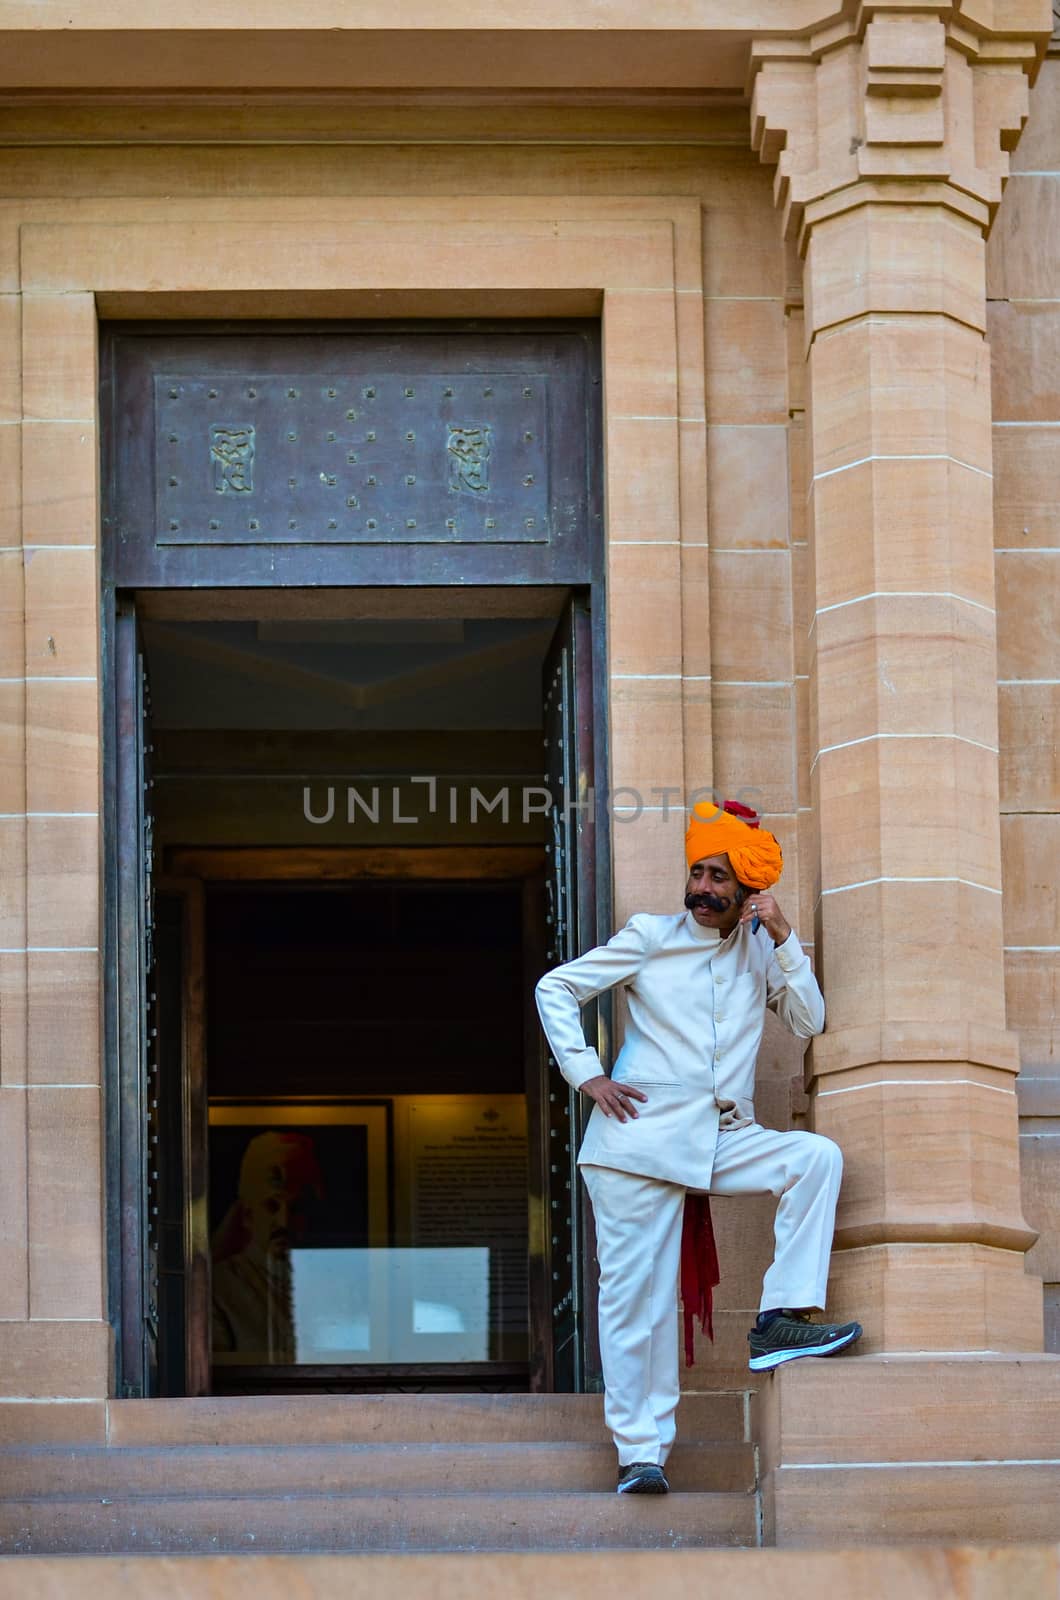 Jodhpur, Rajasthan, India, 2020. Guard with imposing mustache in front of a gate in Umaid Bhawan.